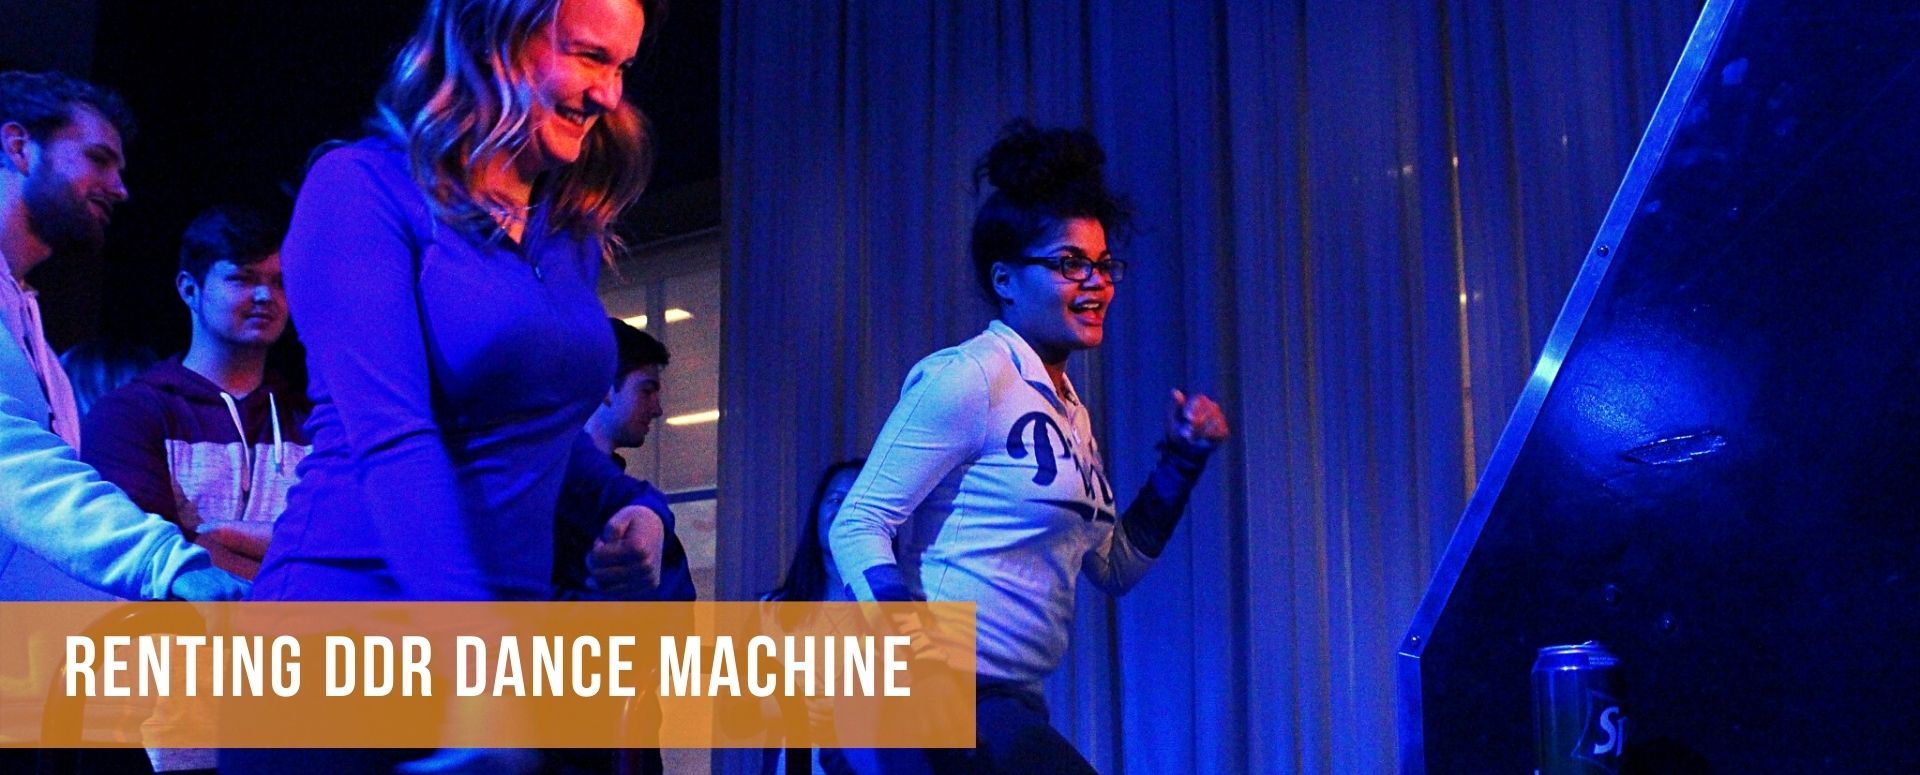 Playing Dance machine - Dance Revolution at Event